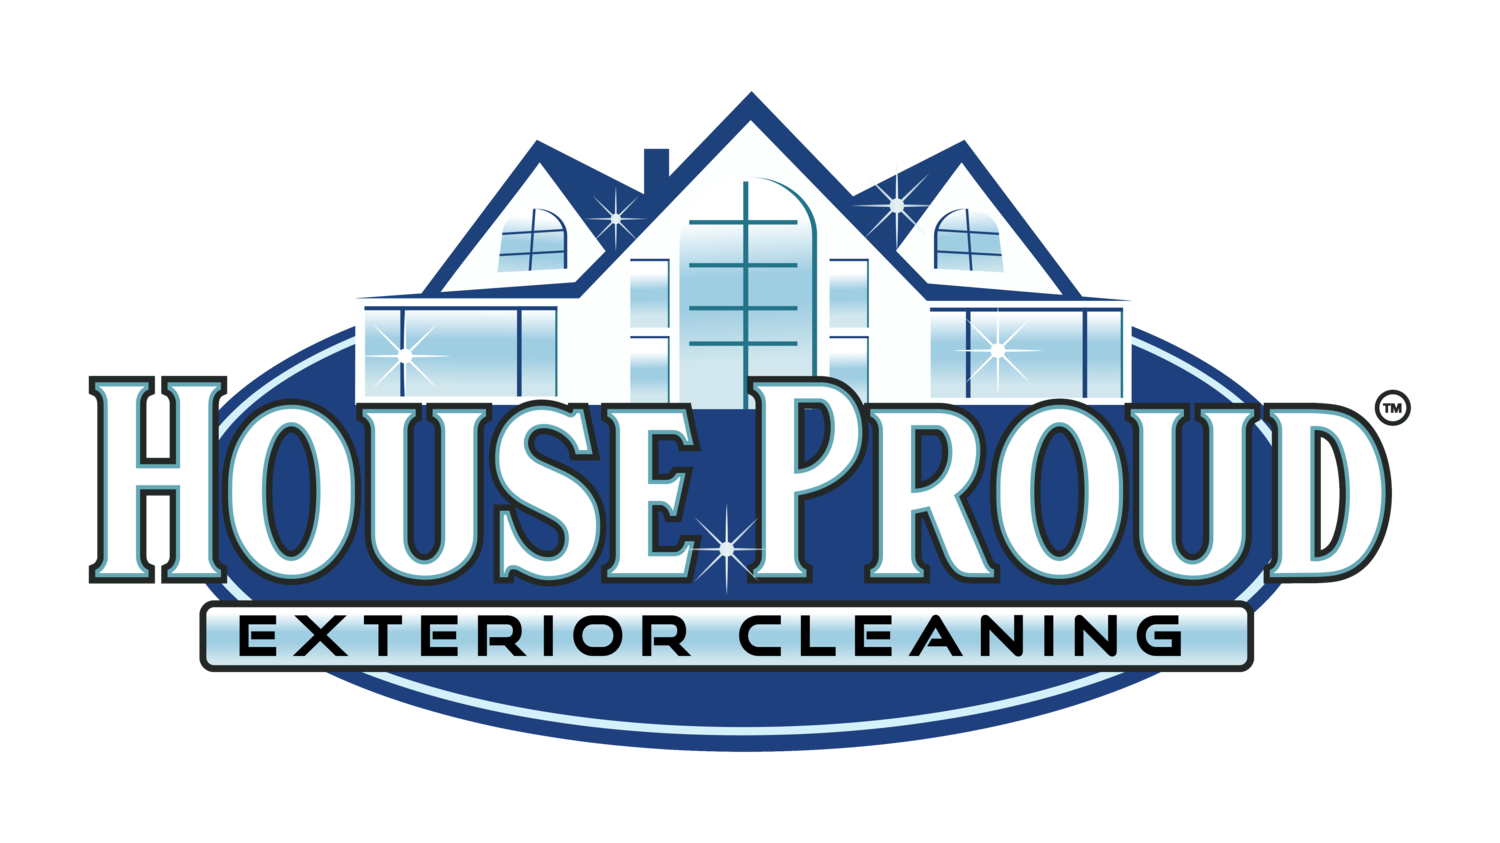 House Proud Exterior Cleaning